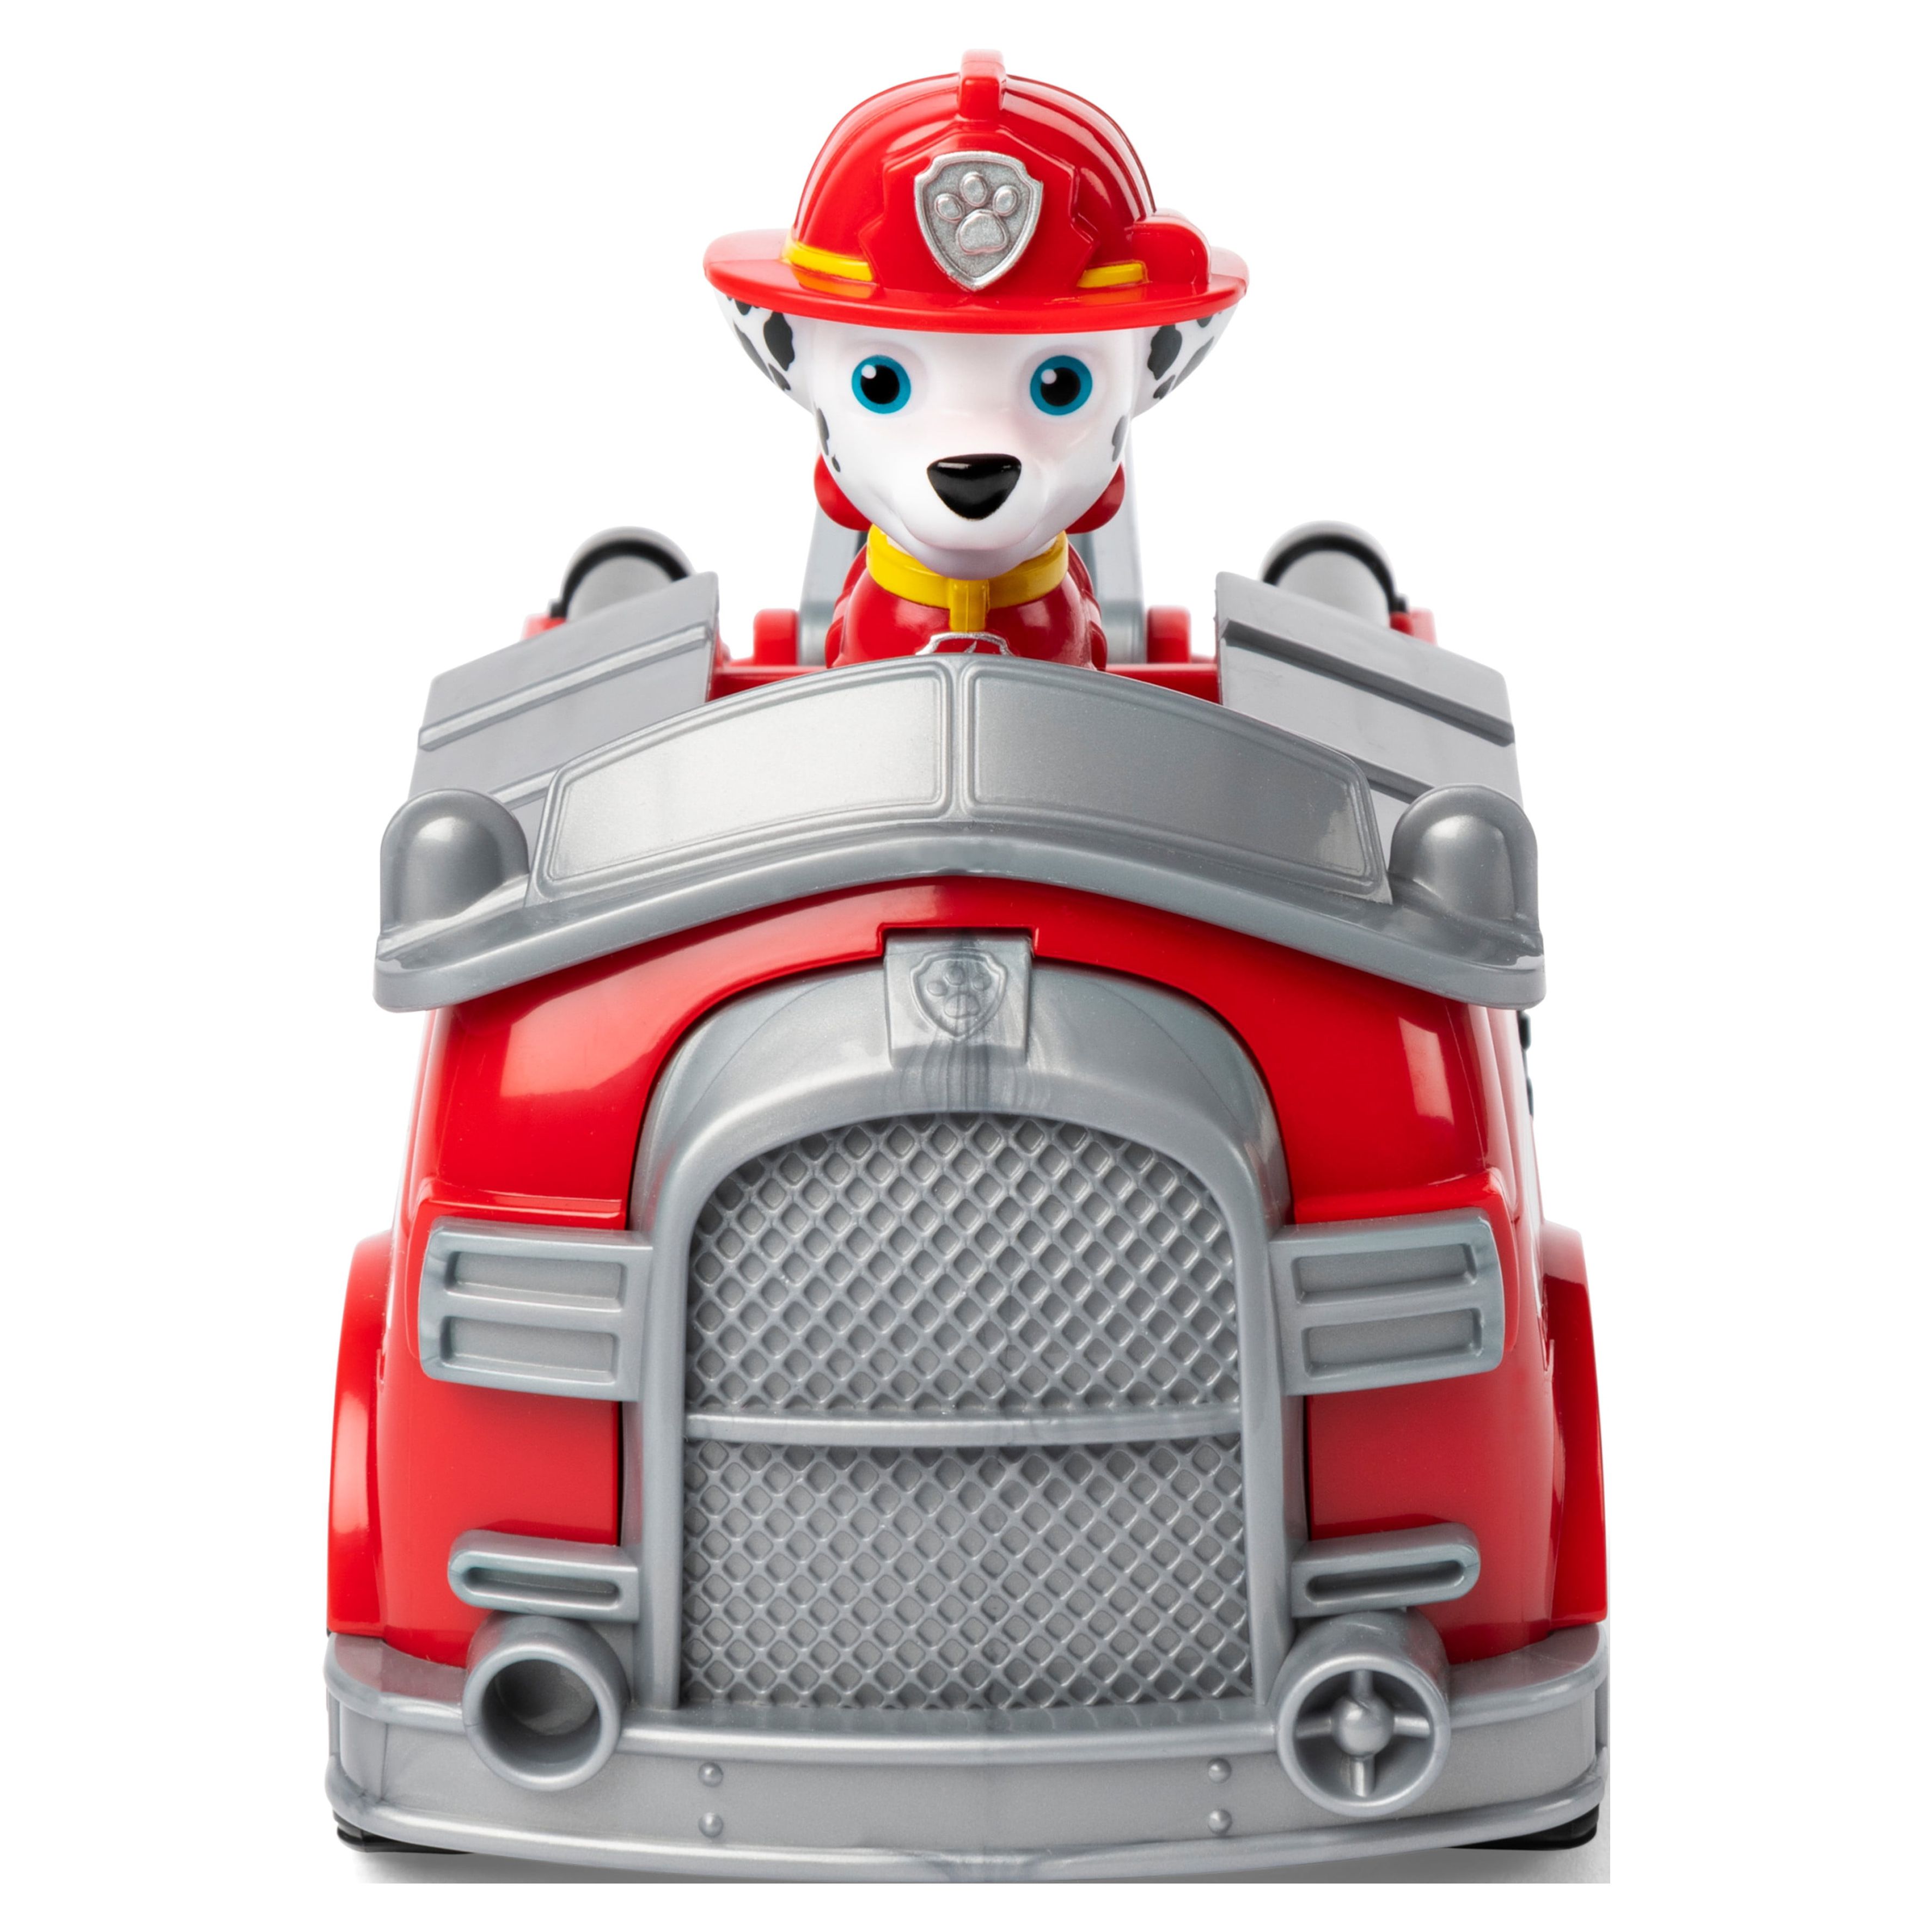 PAW Patrol, Marshall’s Fire Engine Vehicle with Collectible Figure - image 5 of 5